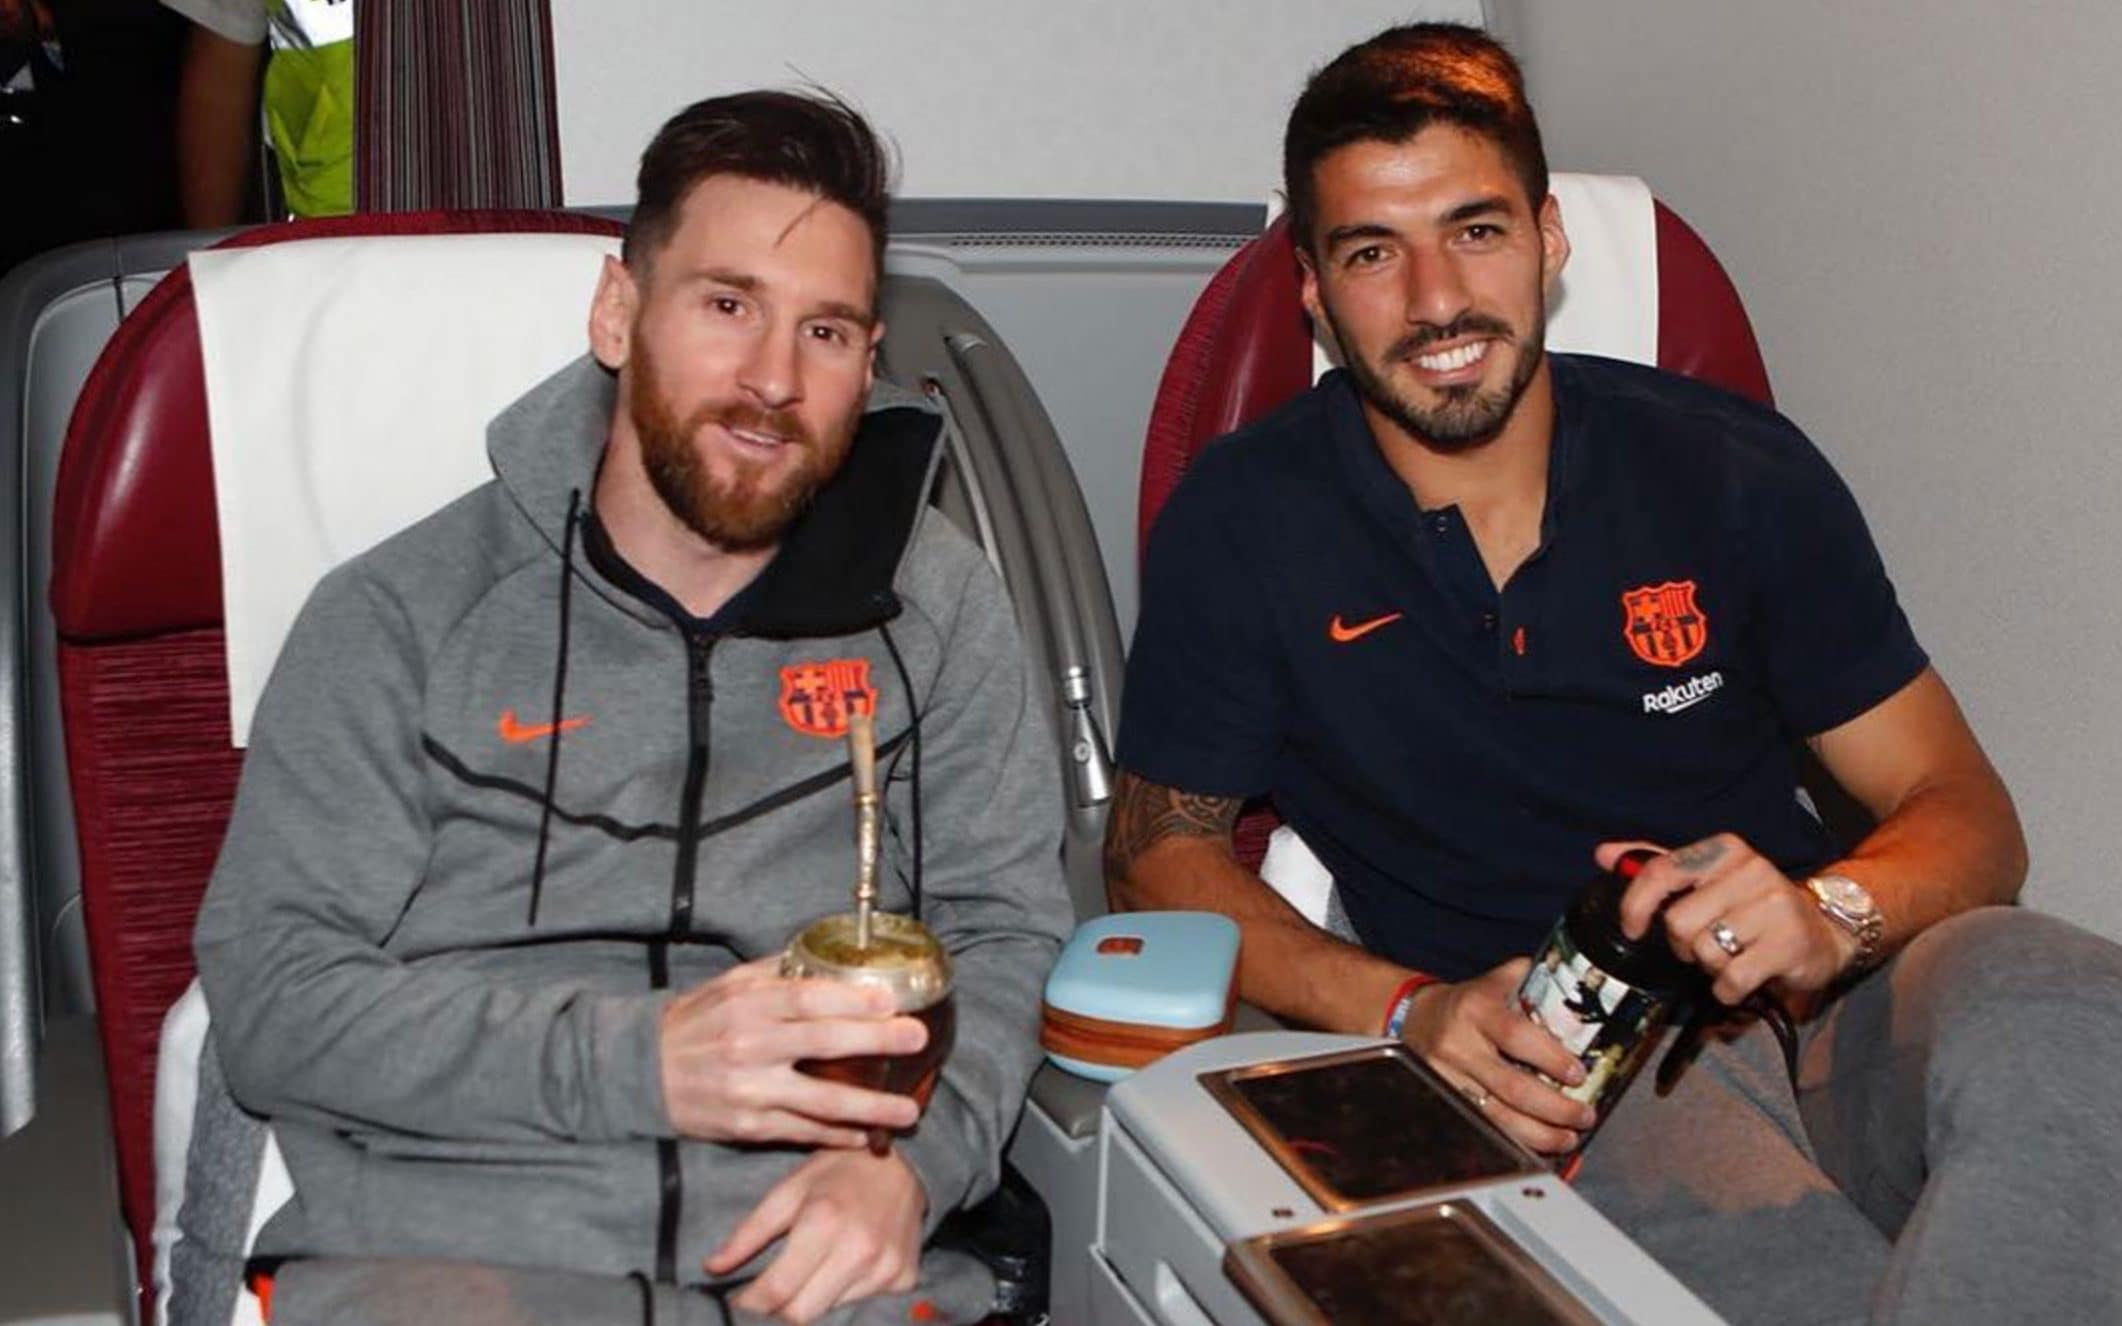 Luis Suarez on Lionel Messi’s contract leak: “I don’t understand how people have so much evil in them”